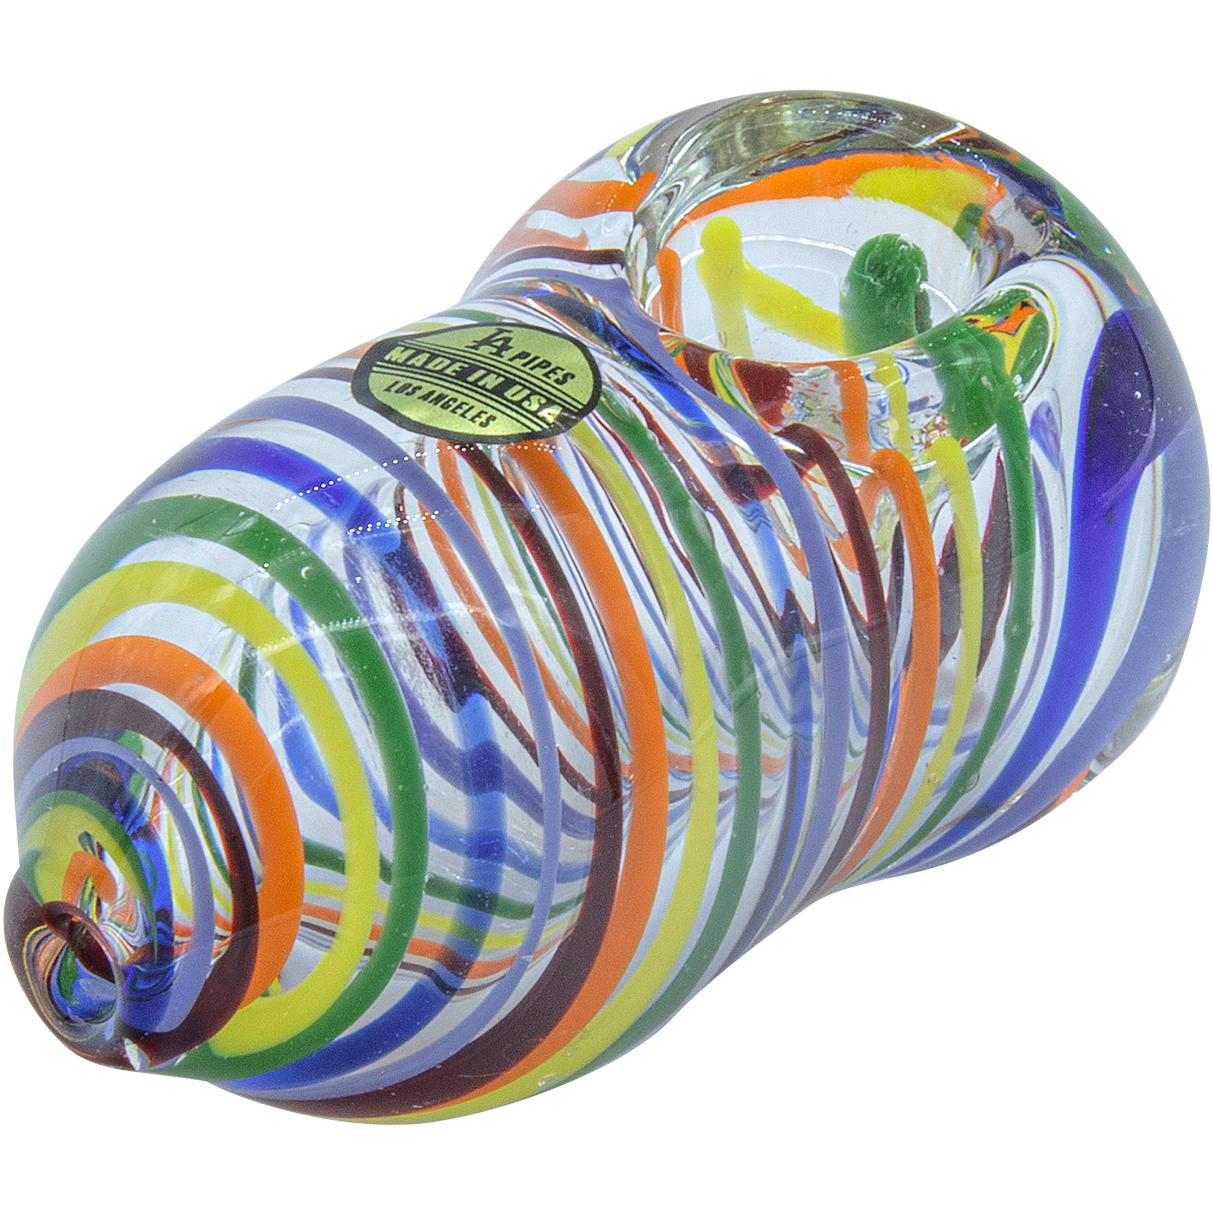 LA Pipes "Easter Egg" Rainbow Swirl 3" Hand Pipe for Dry Herbs, Borosilicate Glass, Top View